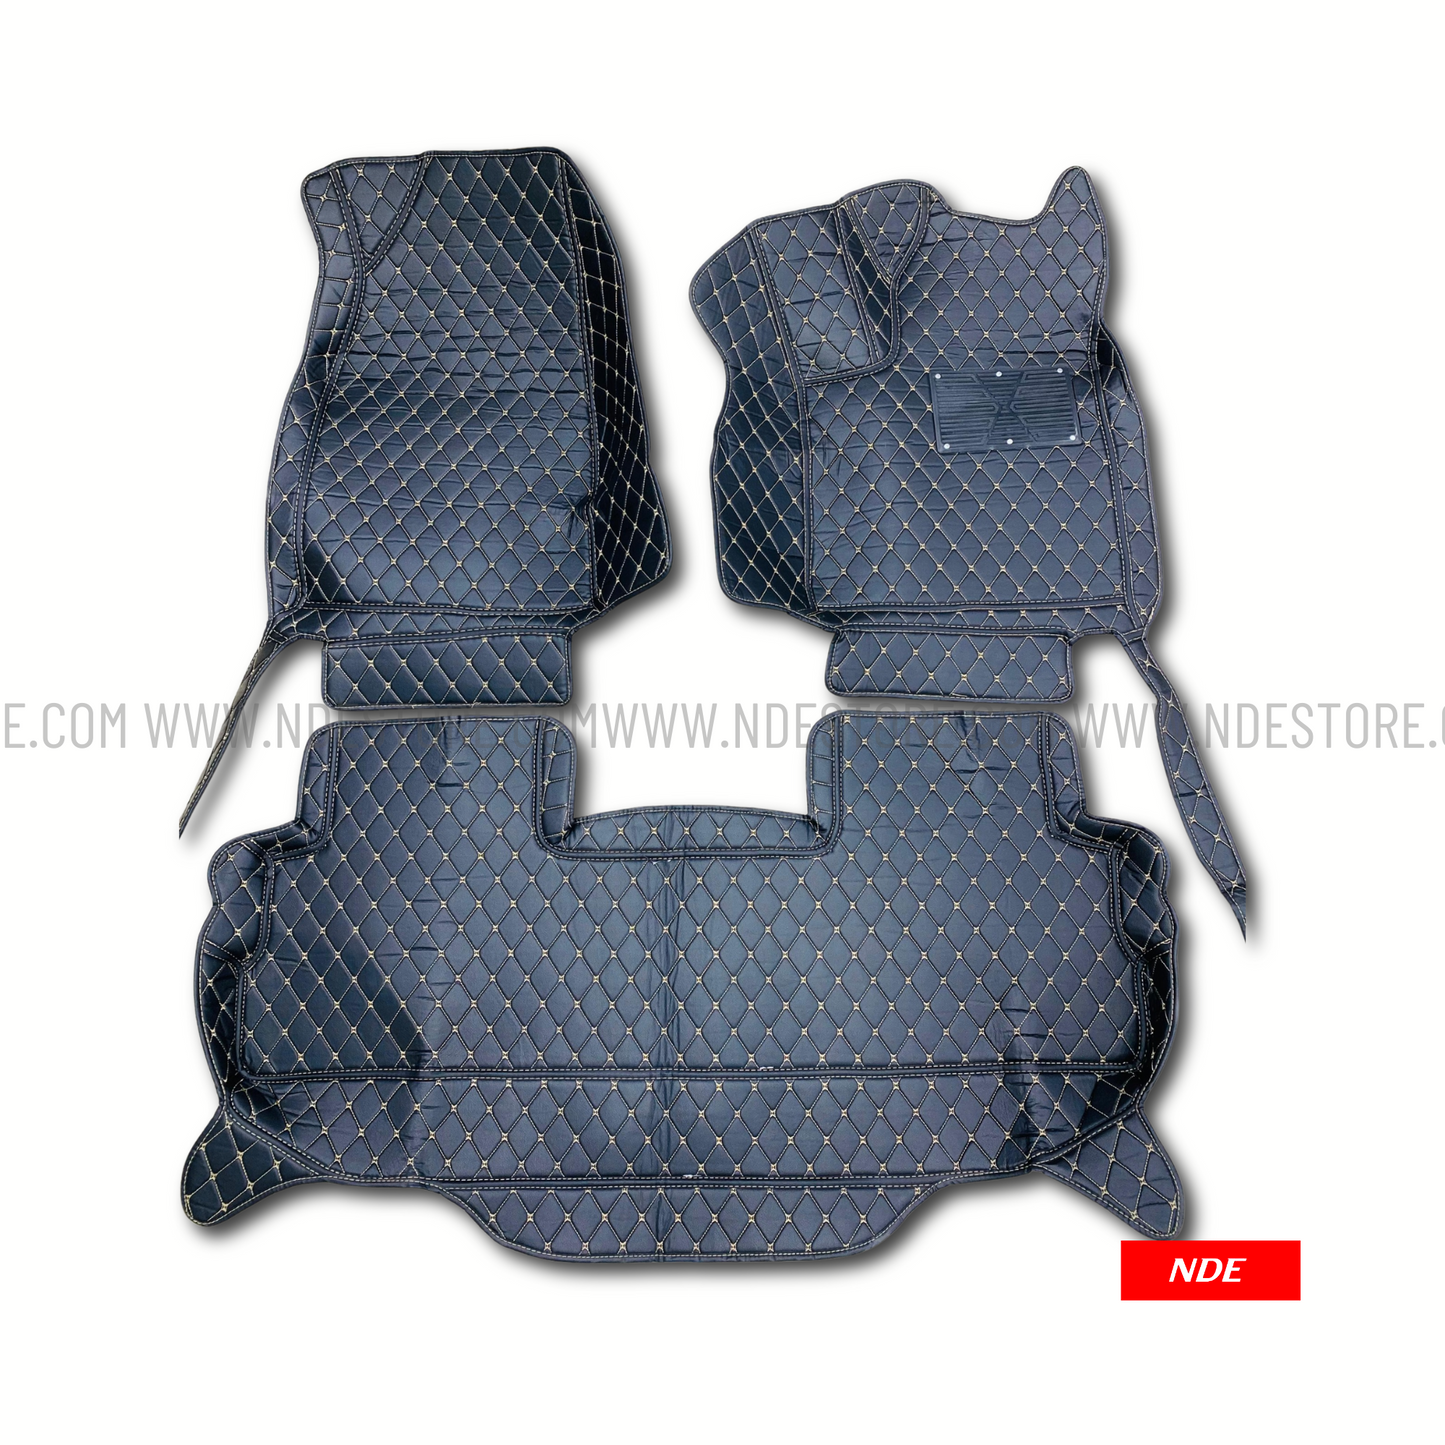 FLOOR MAT 7D STYLE FOR HAVAL H6